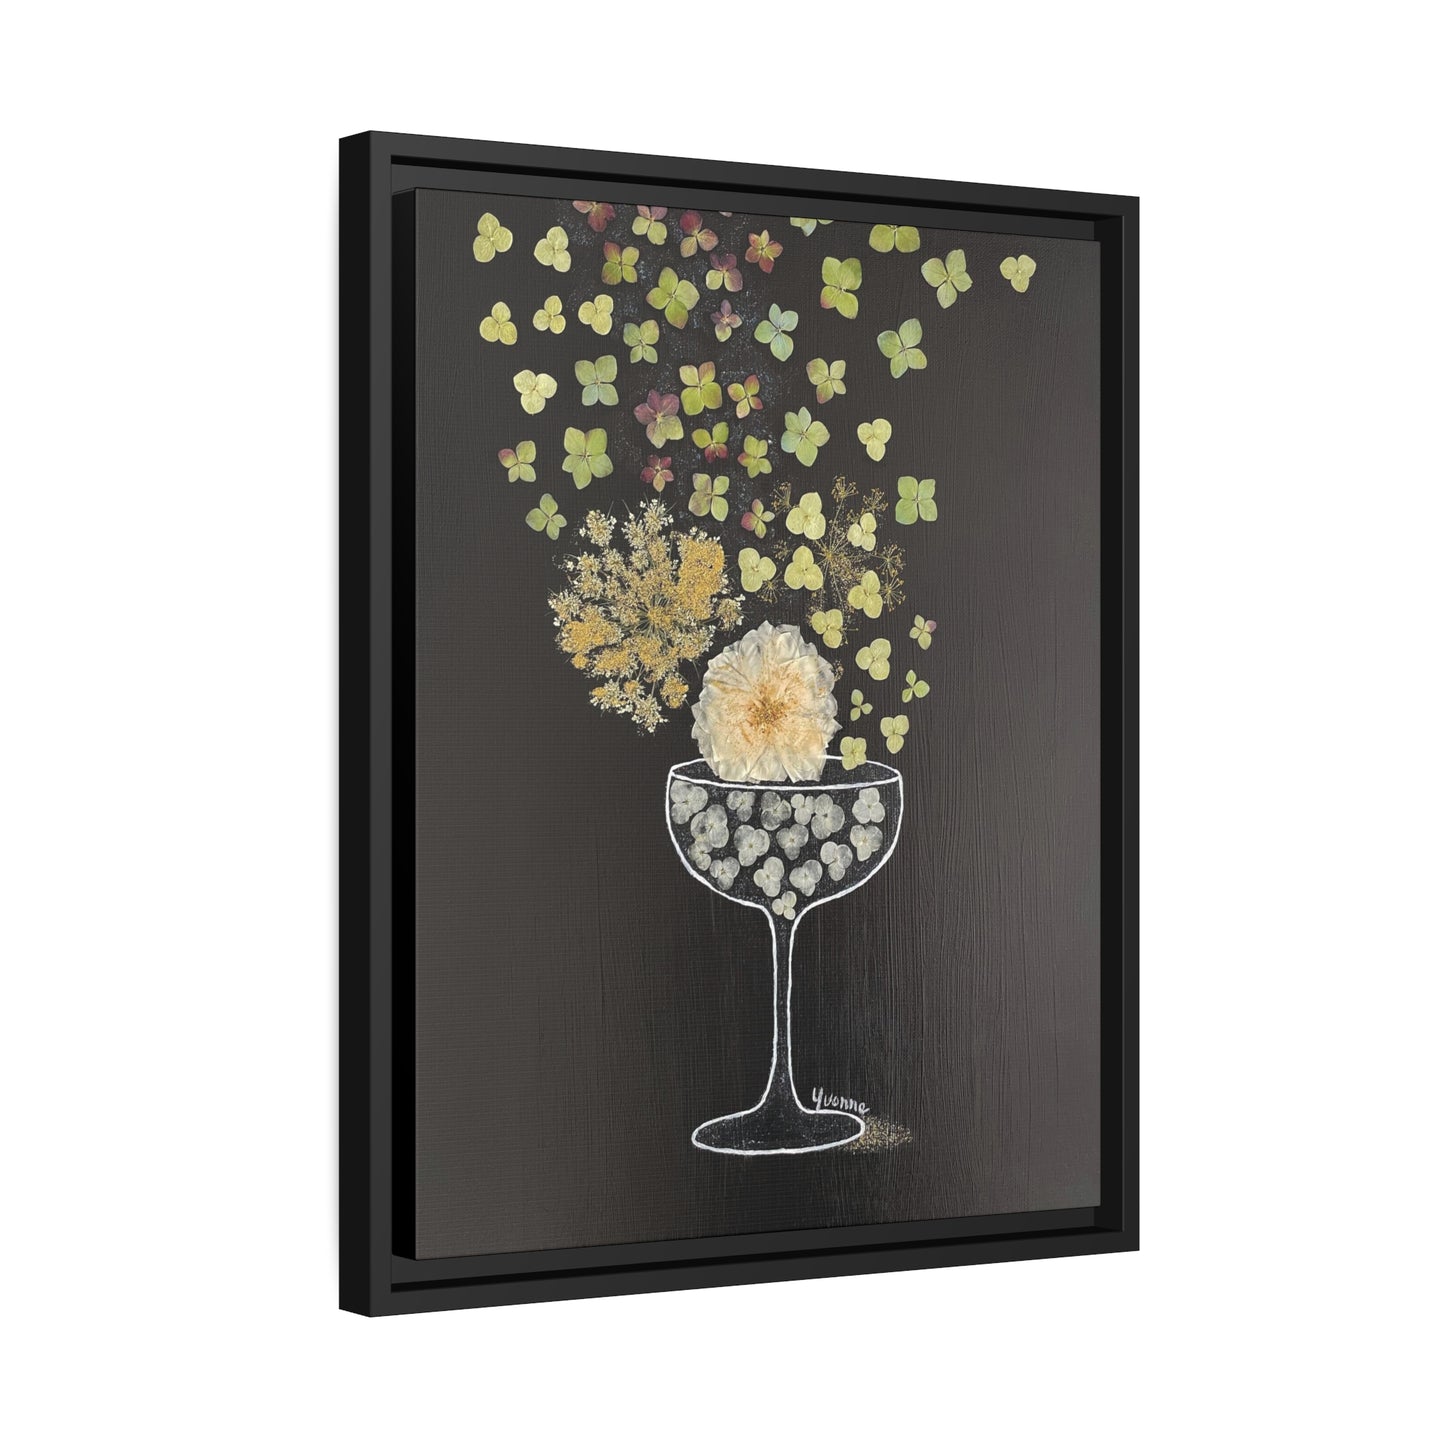 "Effervesce" pressed flower art image by Yvonne Blacker printed on matte canvas with black frame